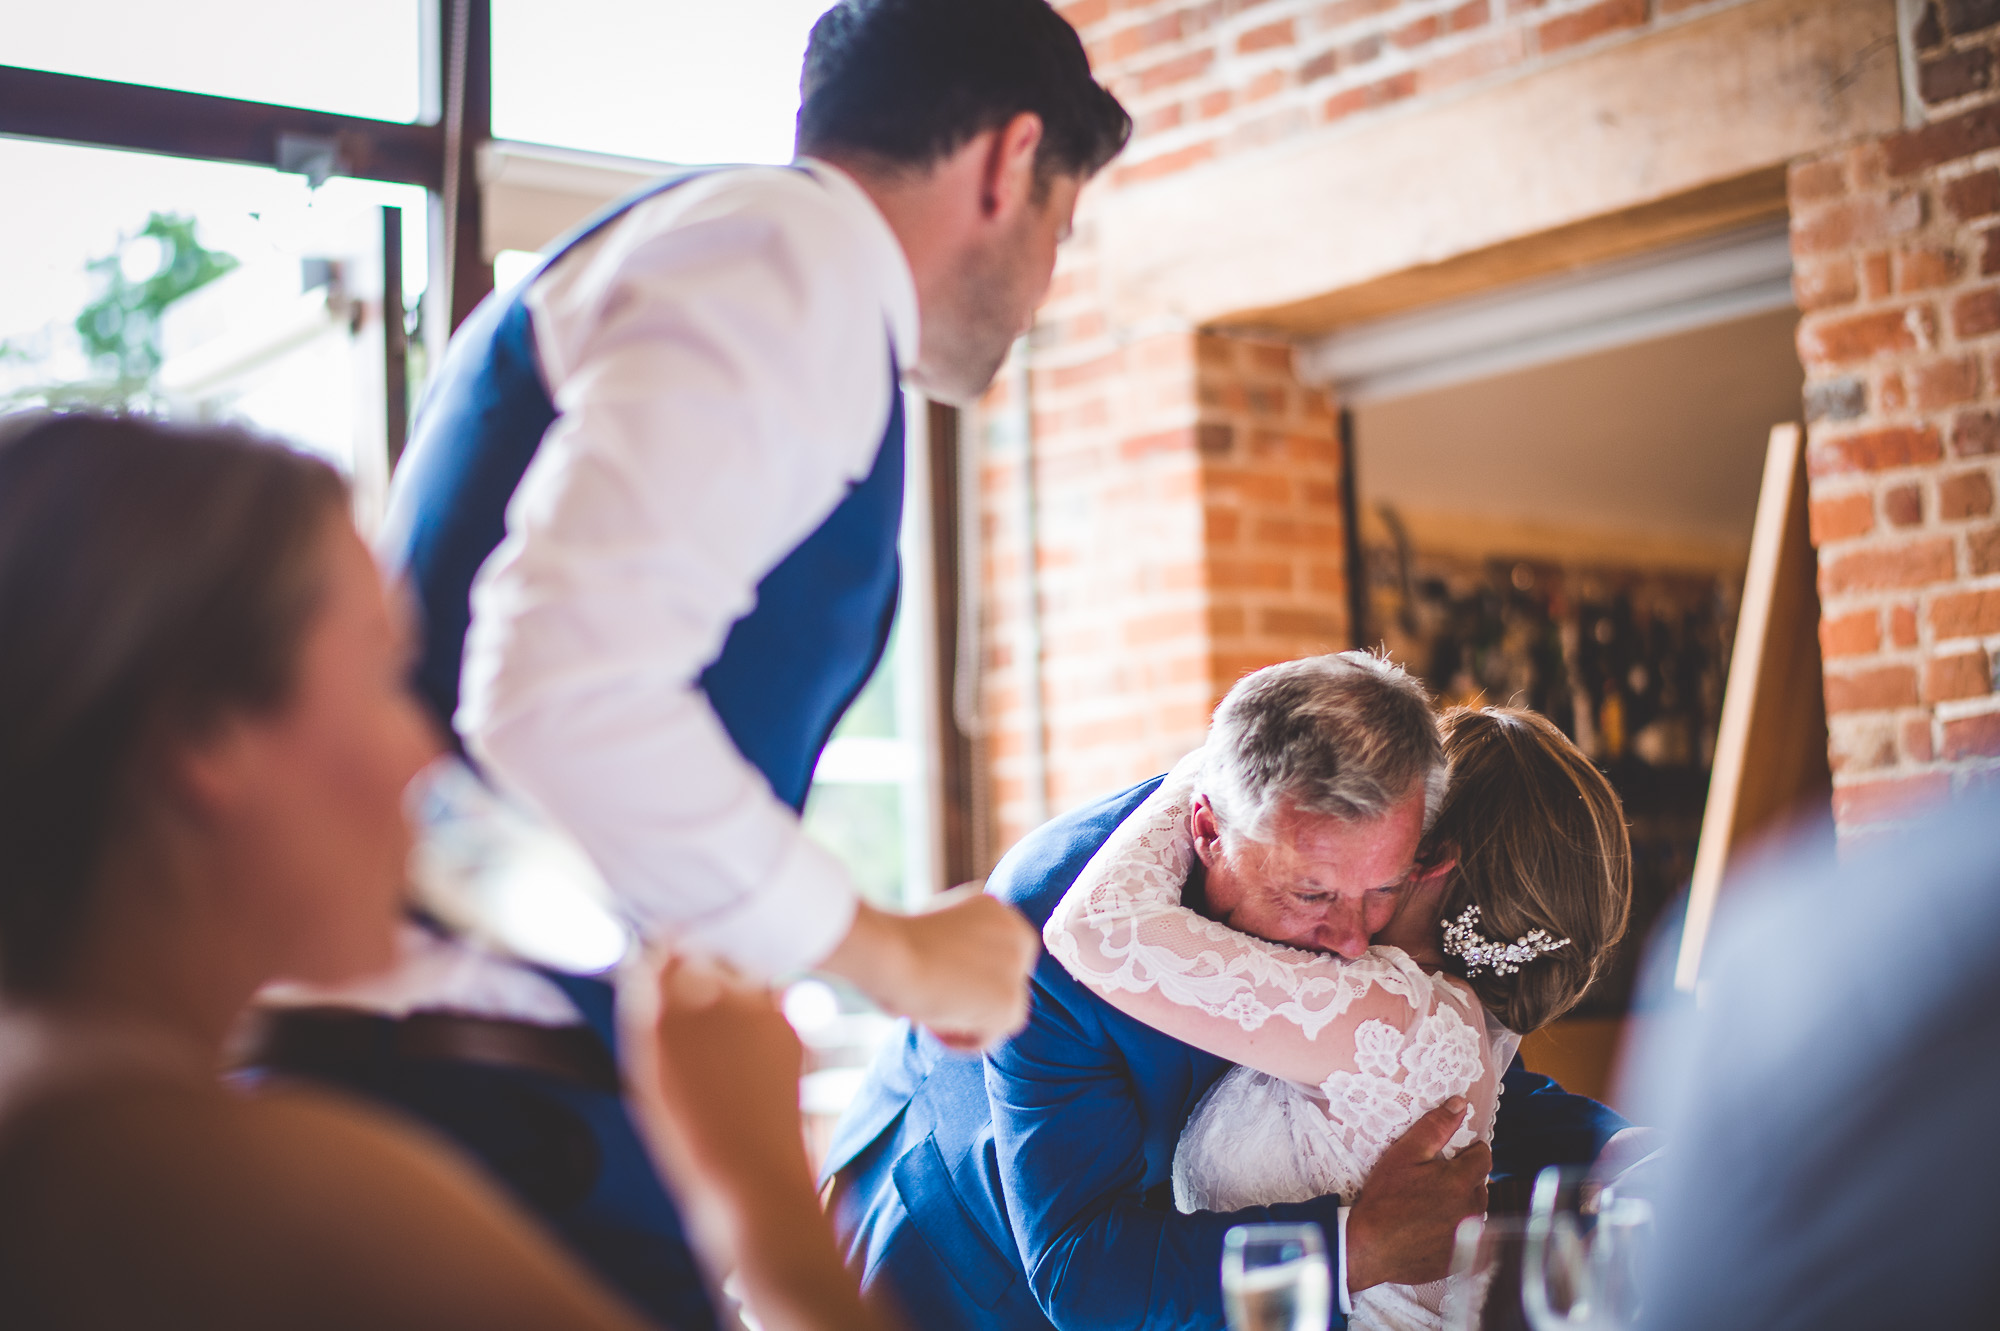 A wedding photographer captures a bride and groom hugging at their wedding reception.